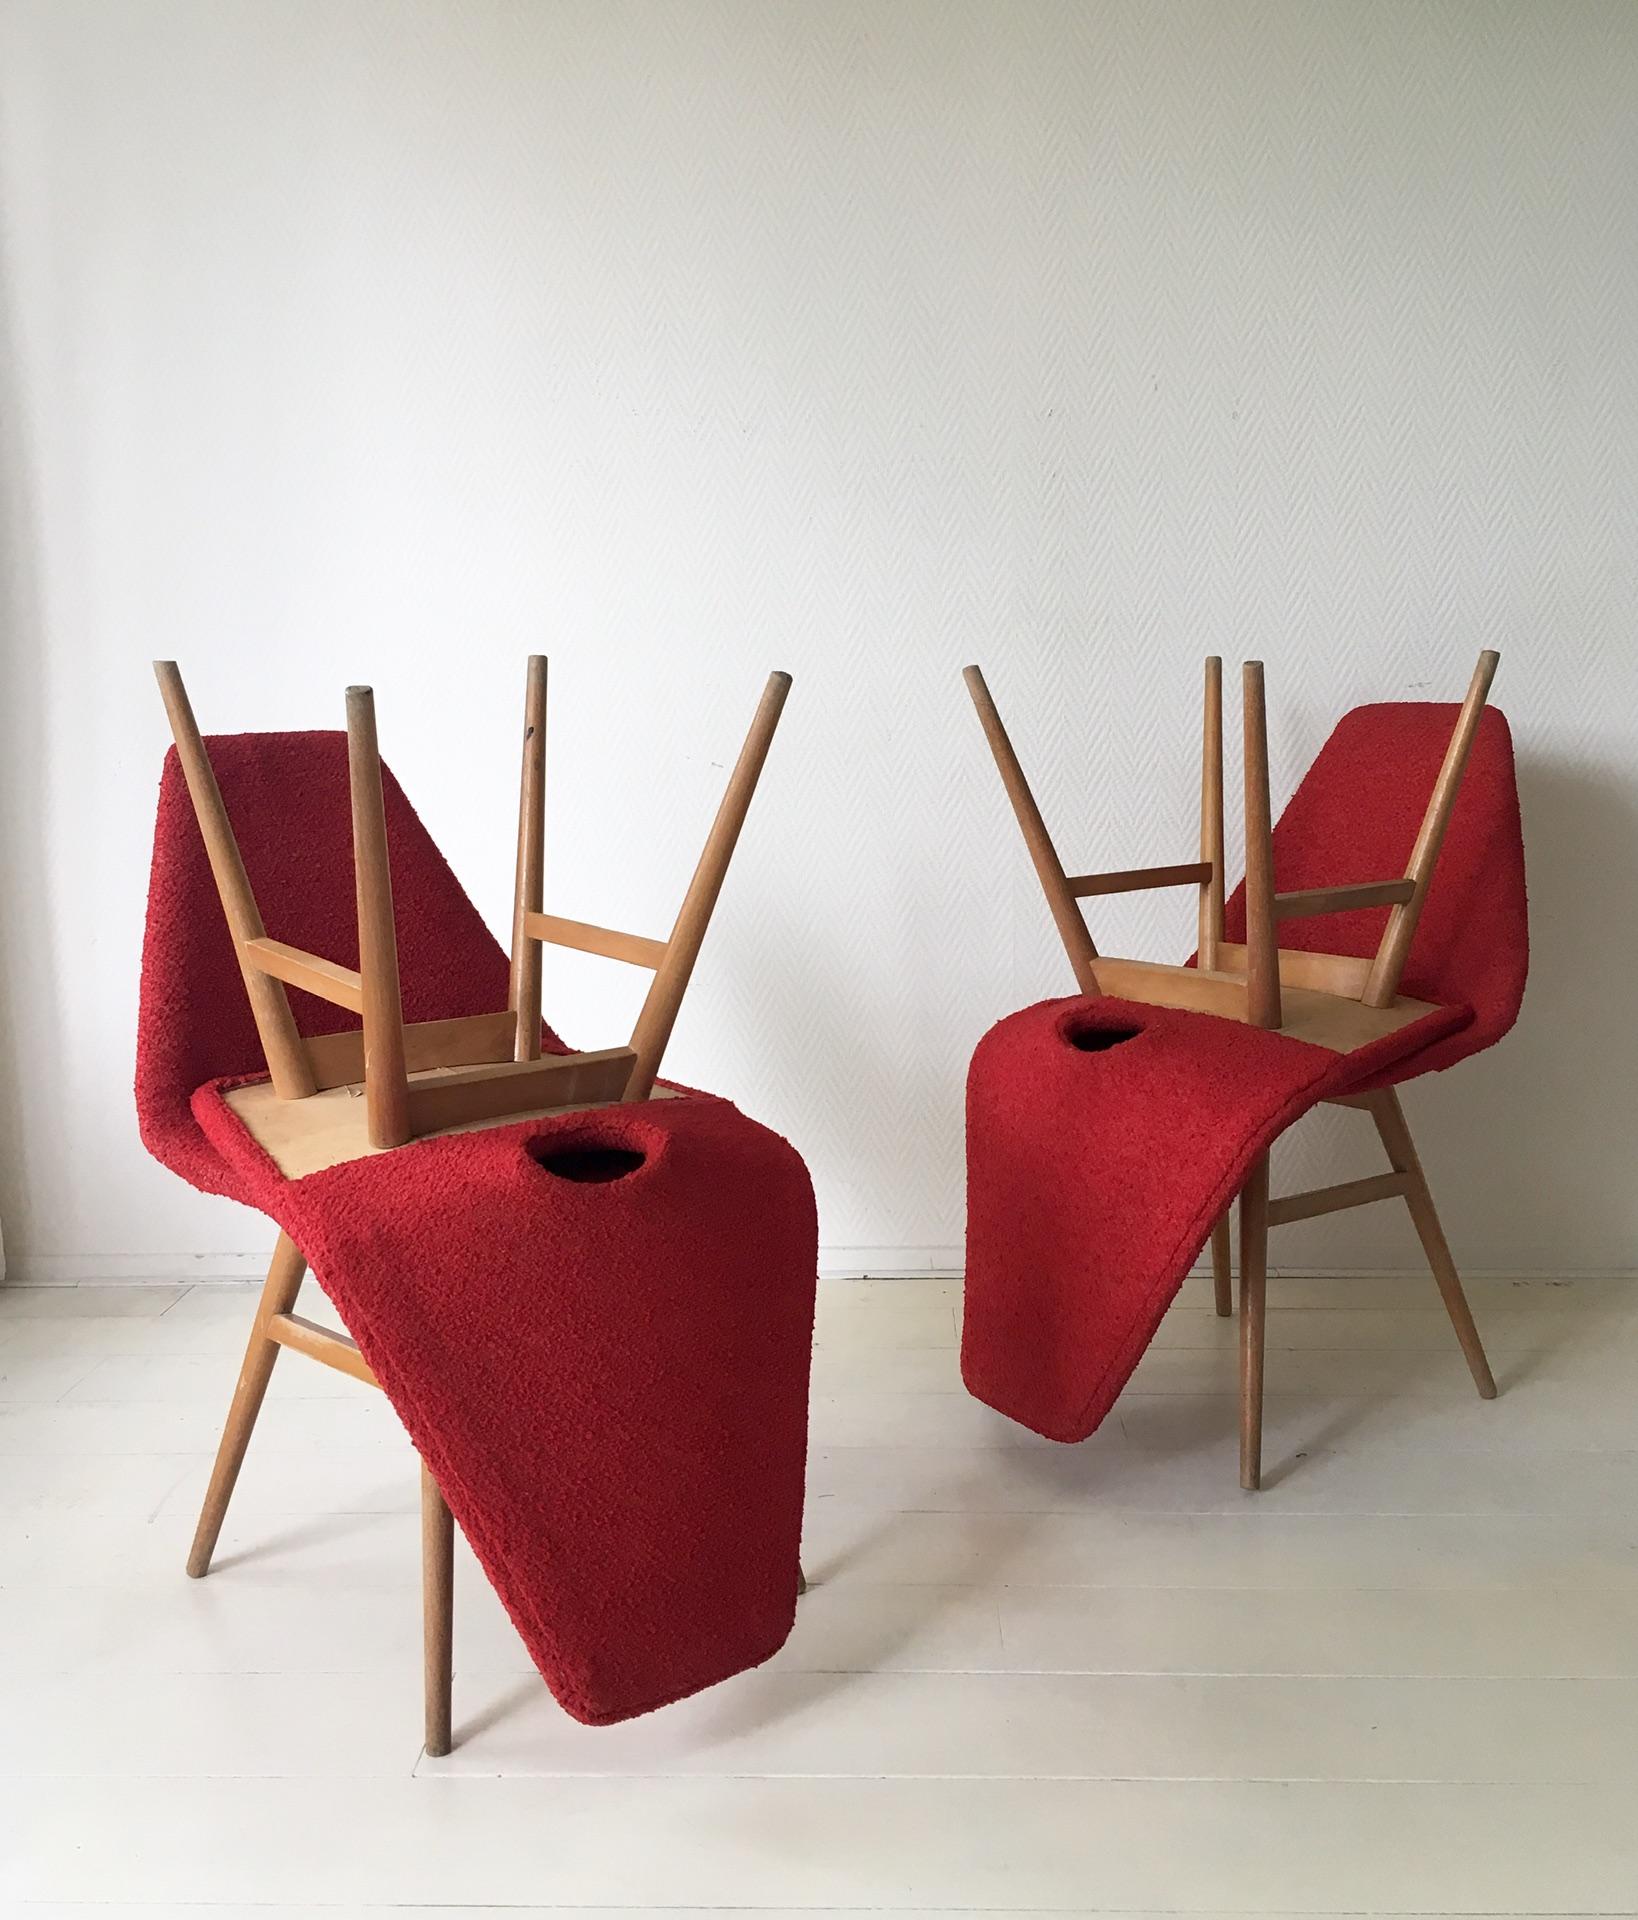 Midcentury Hungarian Chairs, Side Chairs by Judit Burian and Erika Szek, 1950s For Sale 2